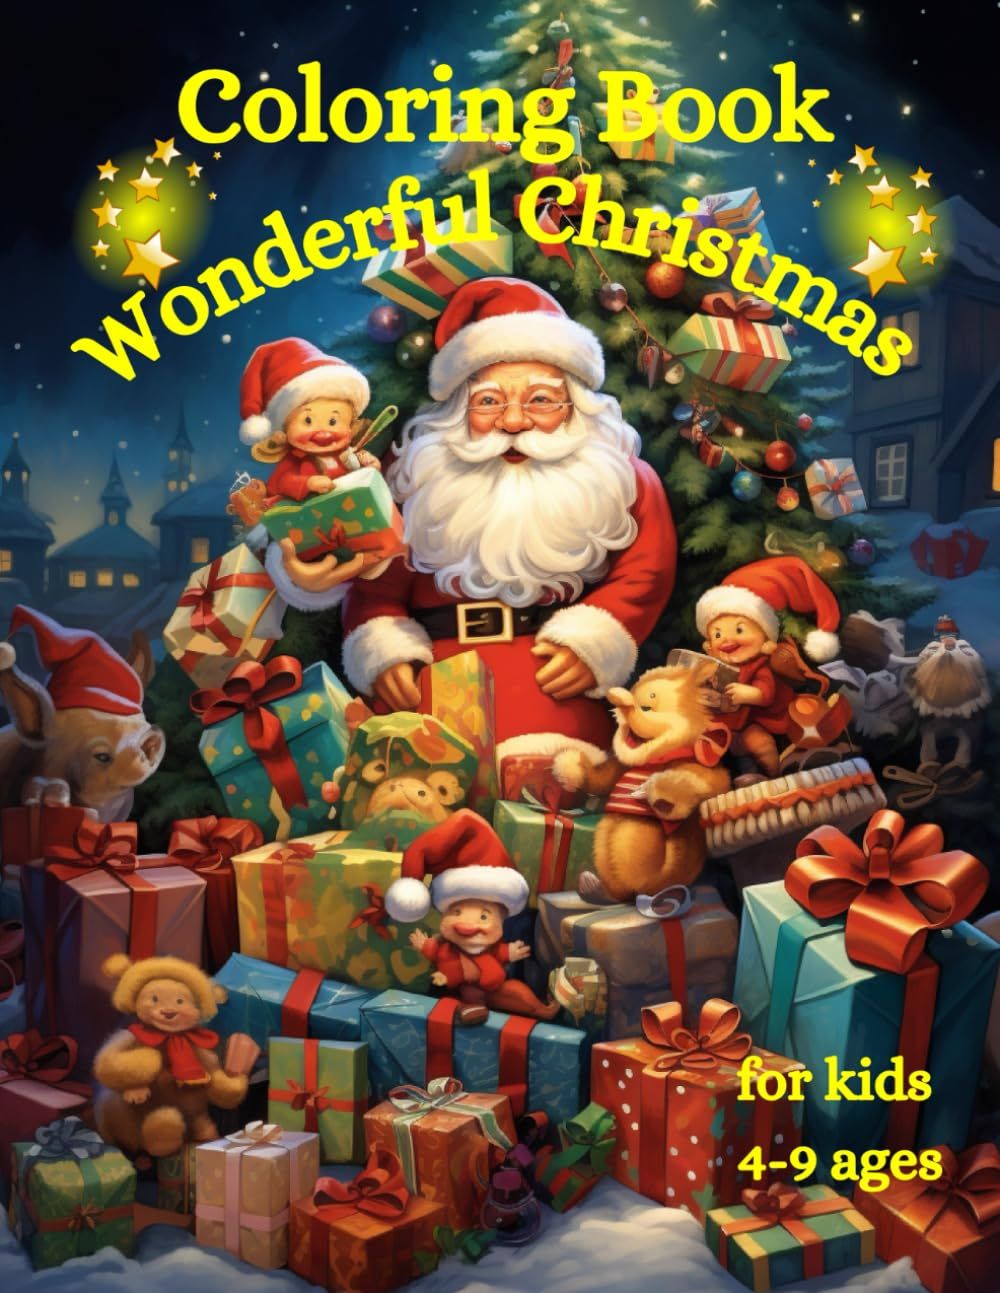 Coloring Book Wonderful Christmas for kids 4-9 ages: 50 Amazing Pages with Santa Claus, Reindeer,... | Amazon (US)